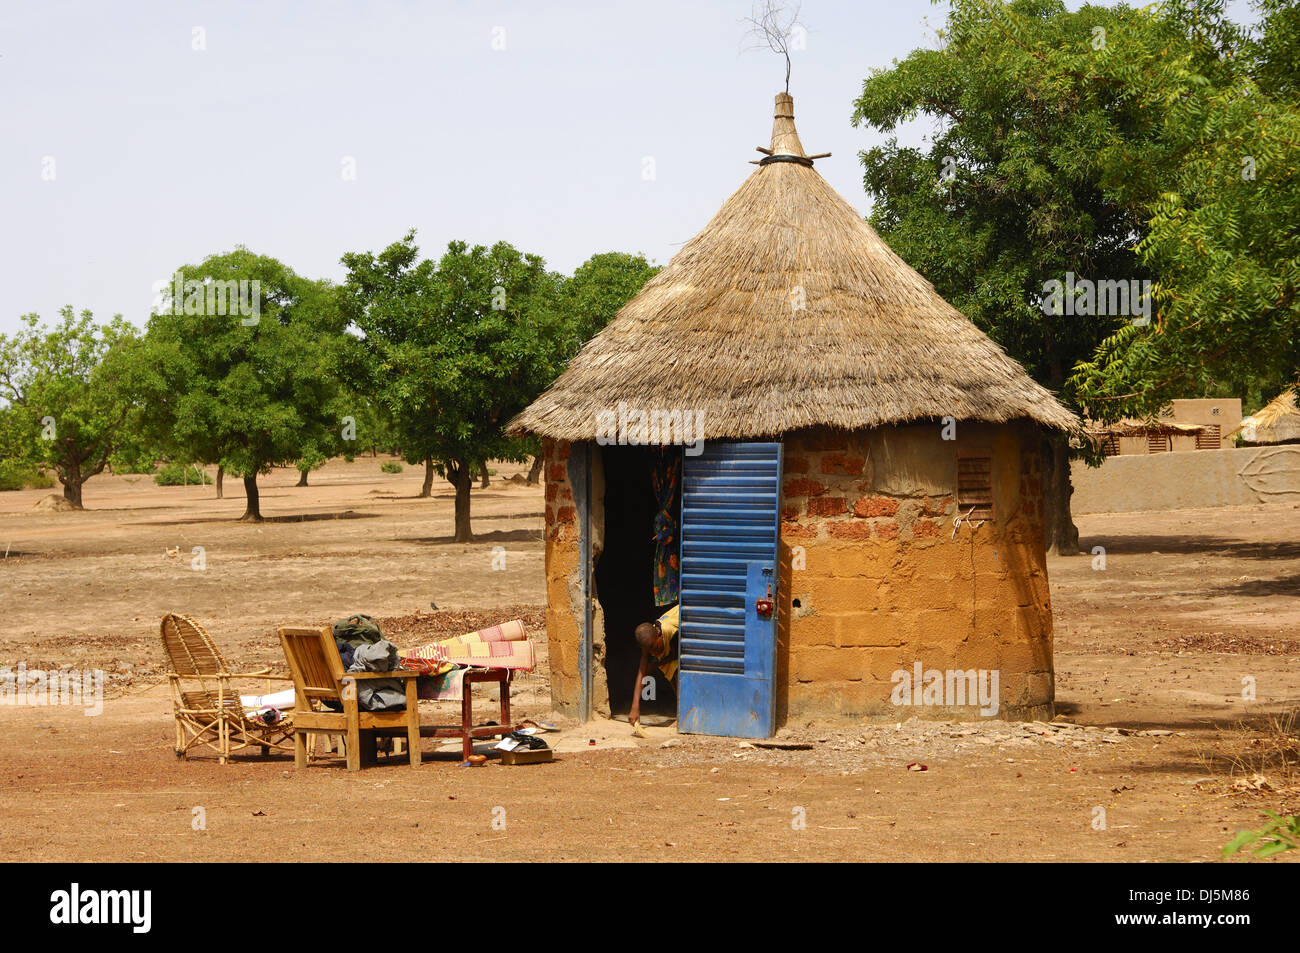 African roundhut, Africa Stock Photo